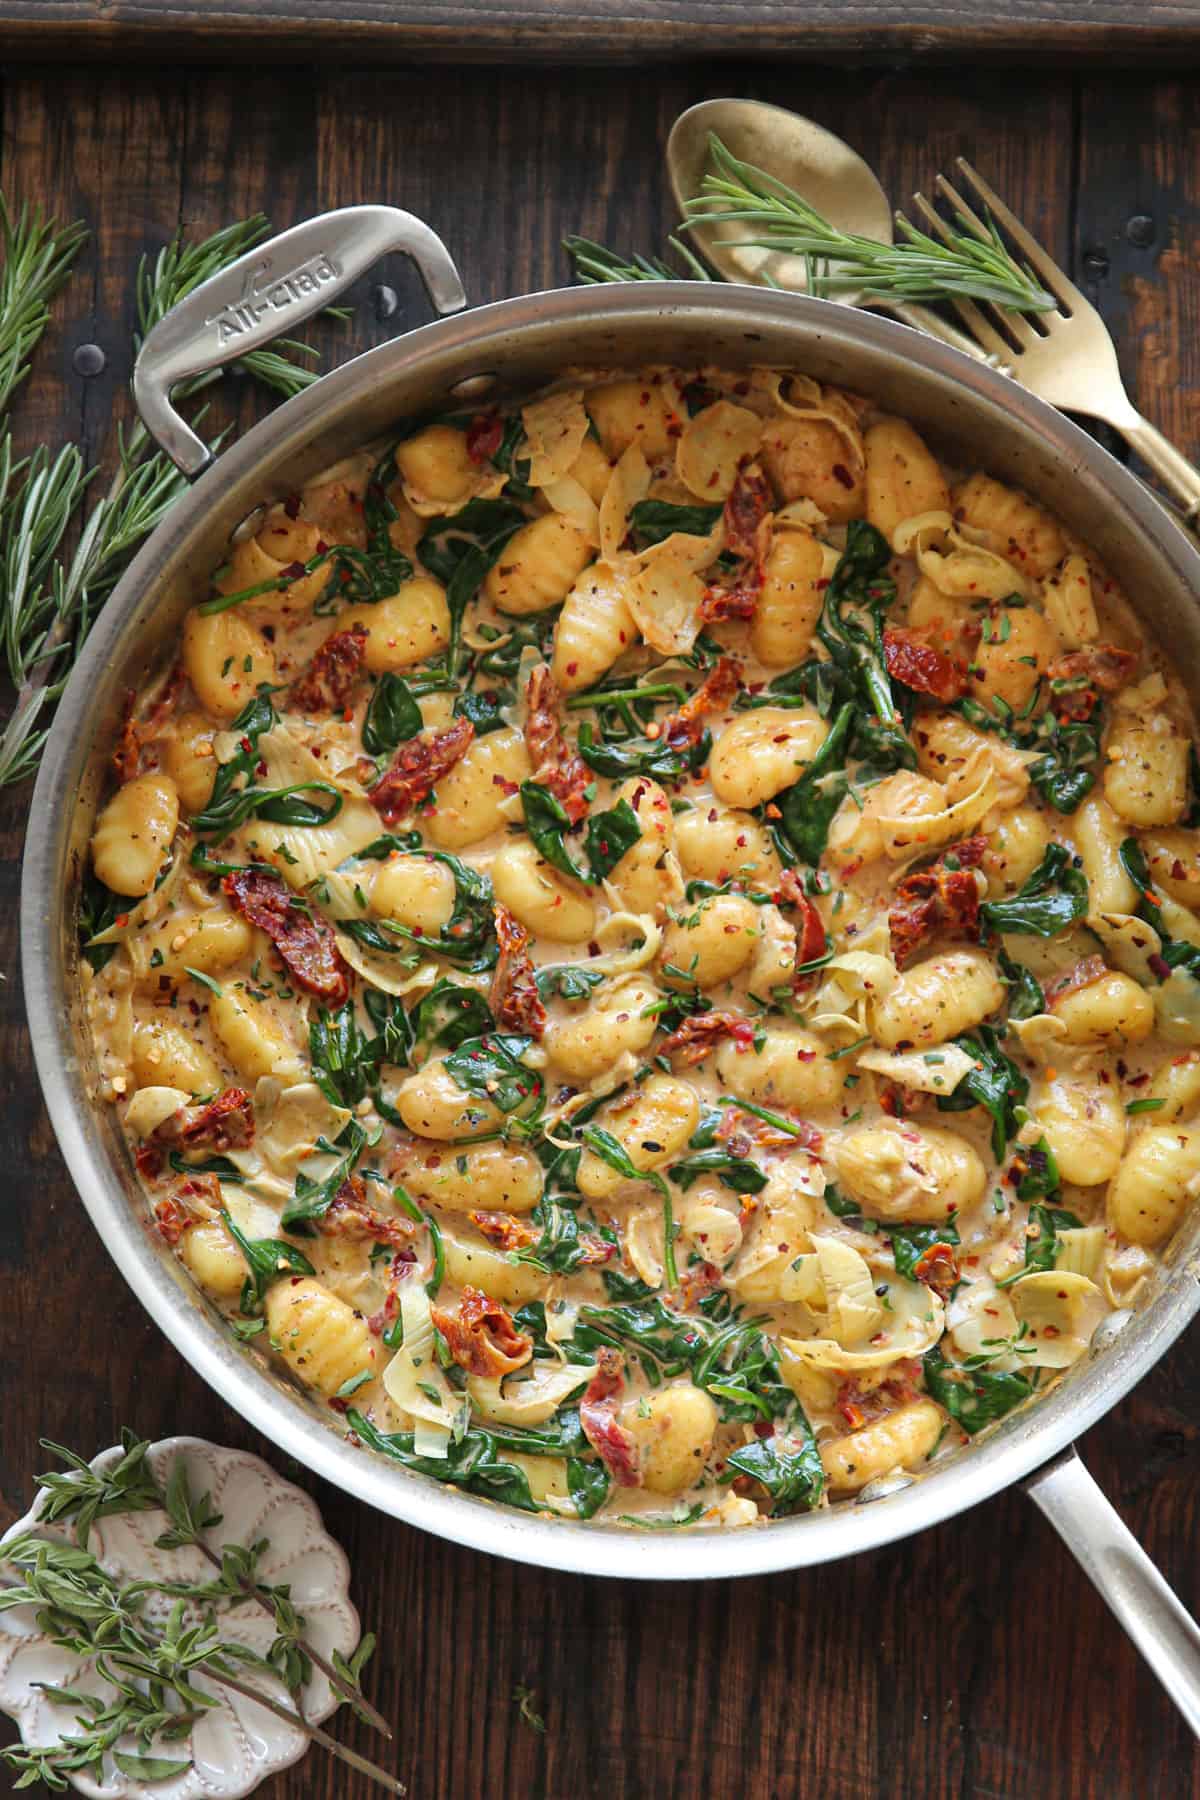 Creamy Tuscan Gnocchi with sun-dried tomatoes, spinach, and artichokes - in a stainless steel pan.